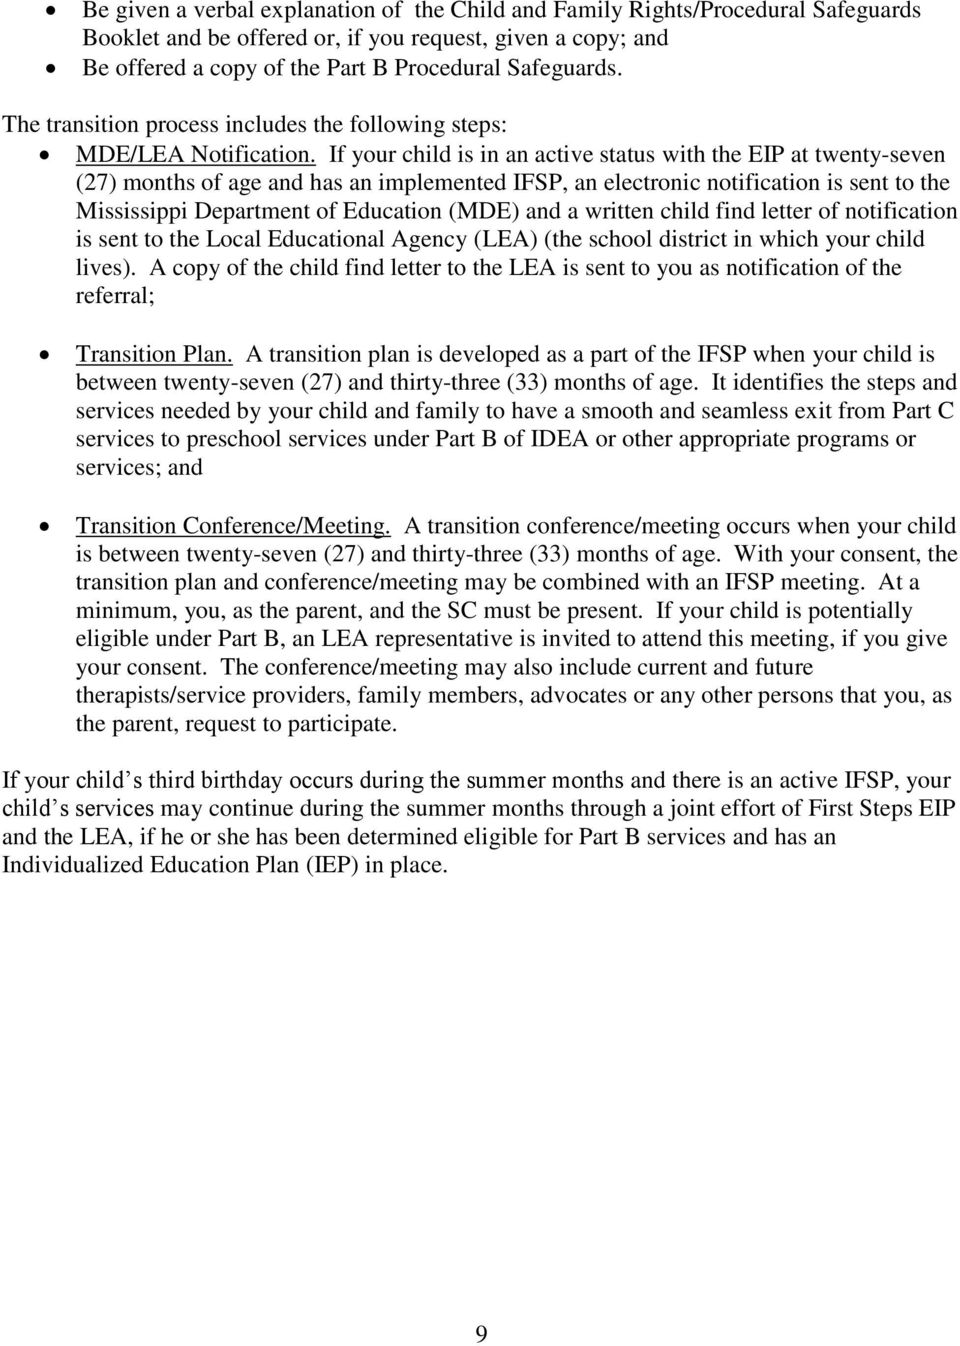 If your child is in an active status with the EIP at twenty-seven (27) months of age and has an implemented IFSP, an electronic notification is sent to the Mississippi Department of Education (MDE)